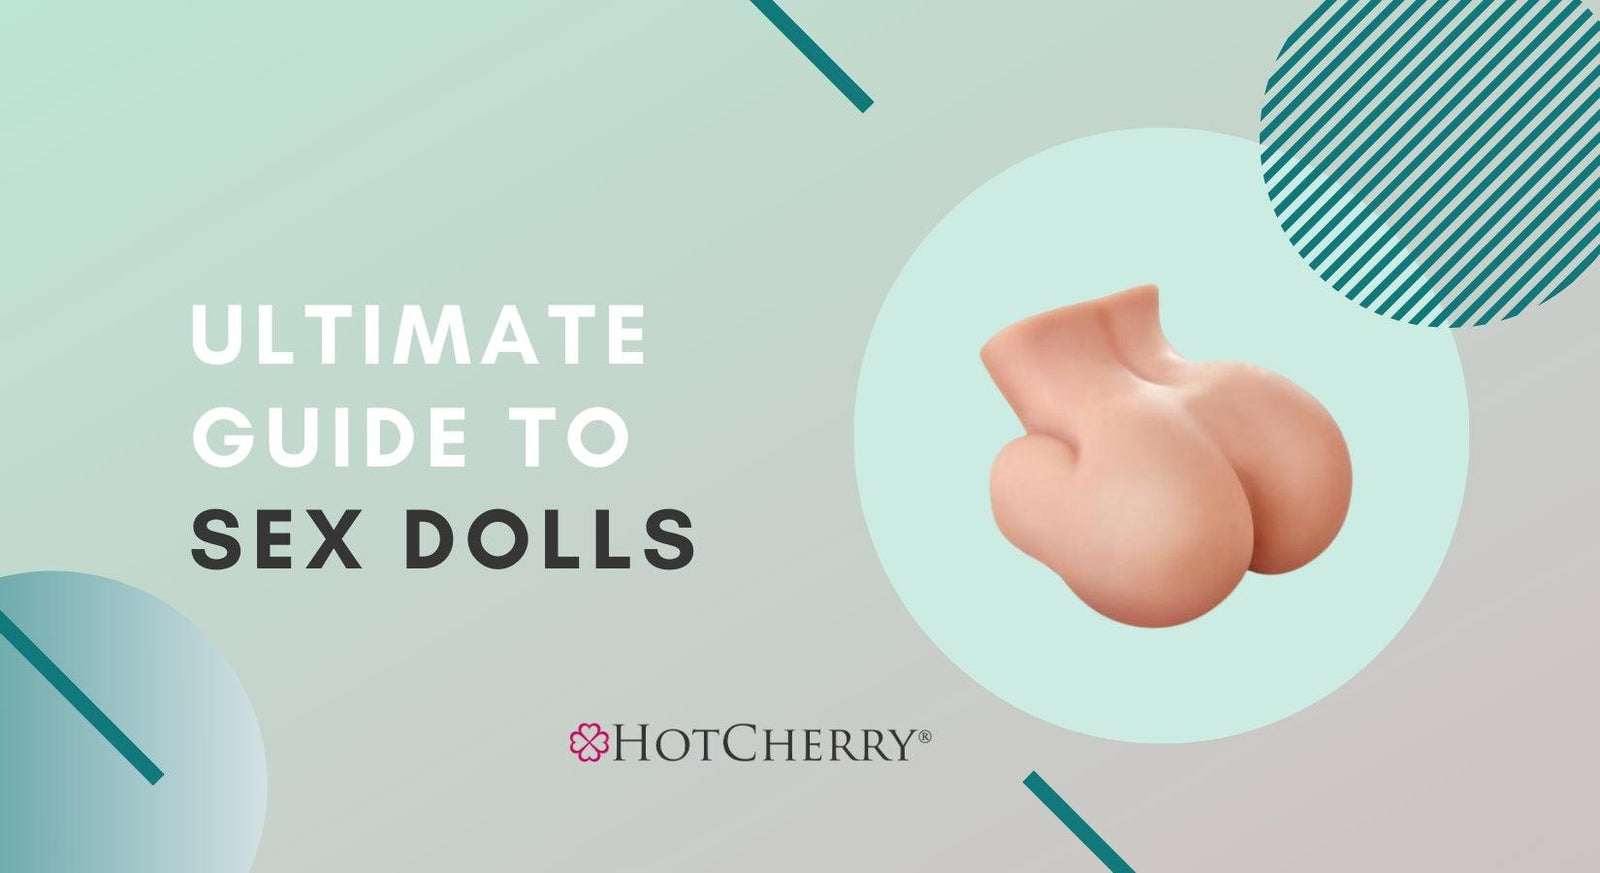 Ultimate Guide to Sex Dolls